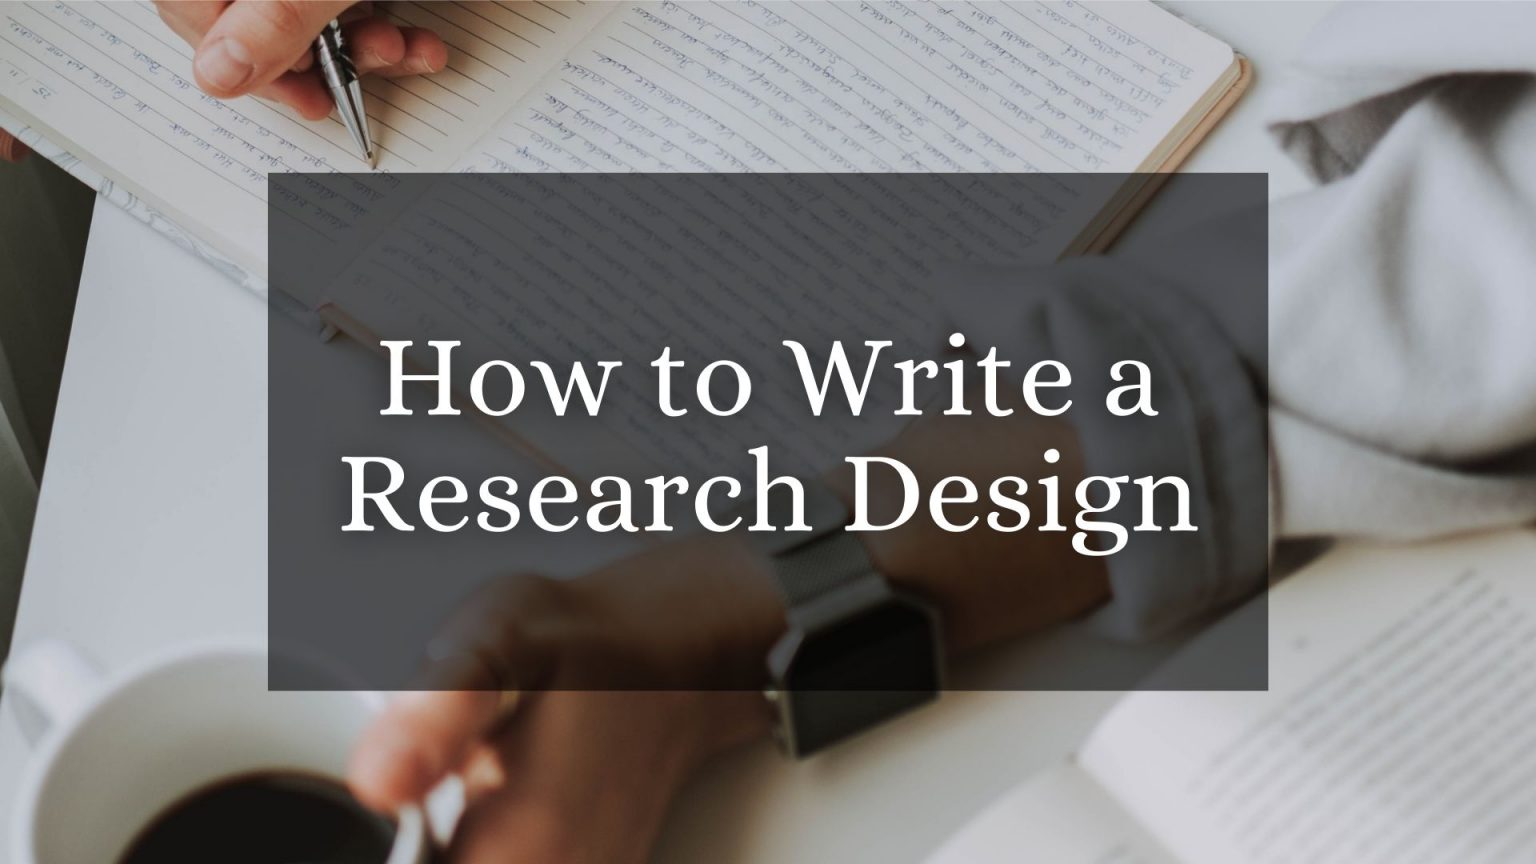 example of how to write a research design